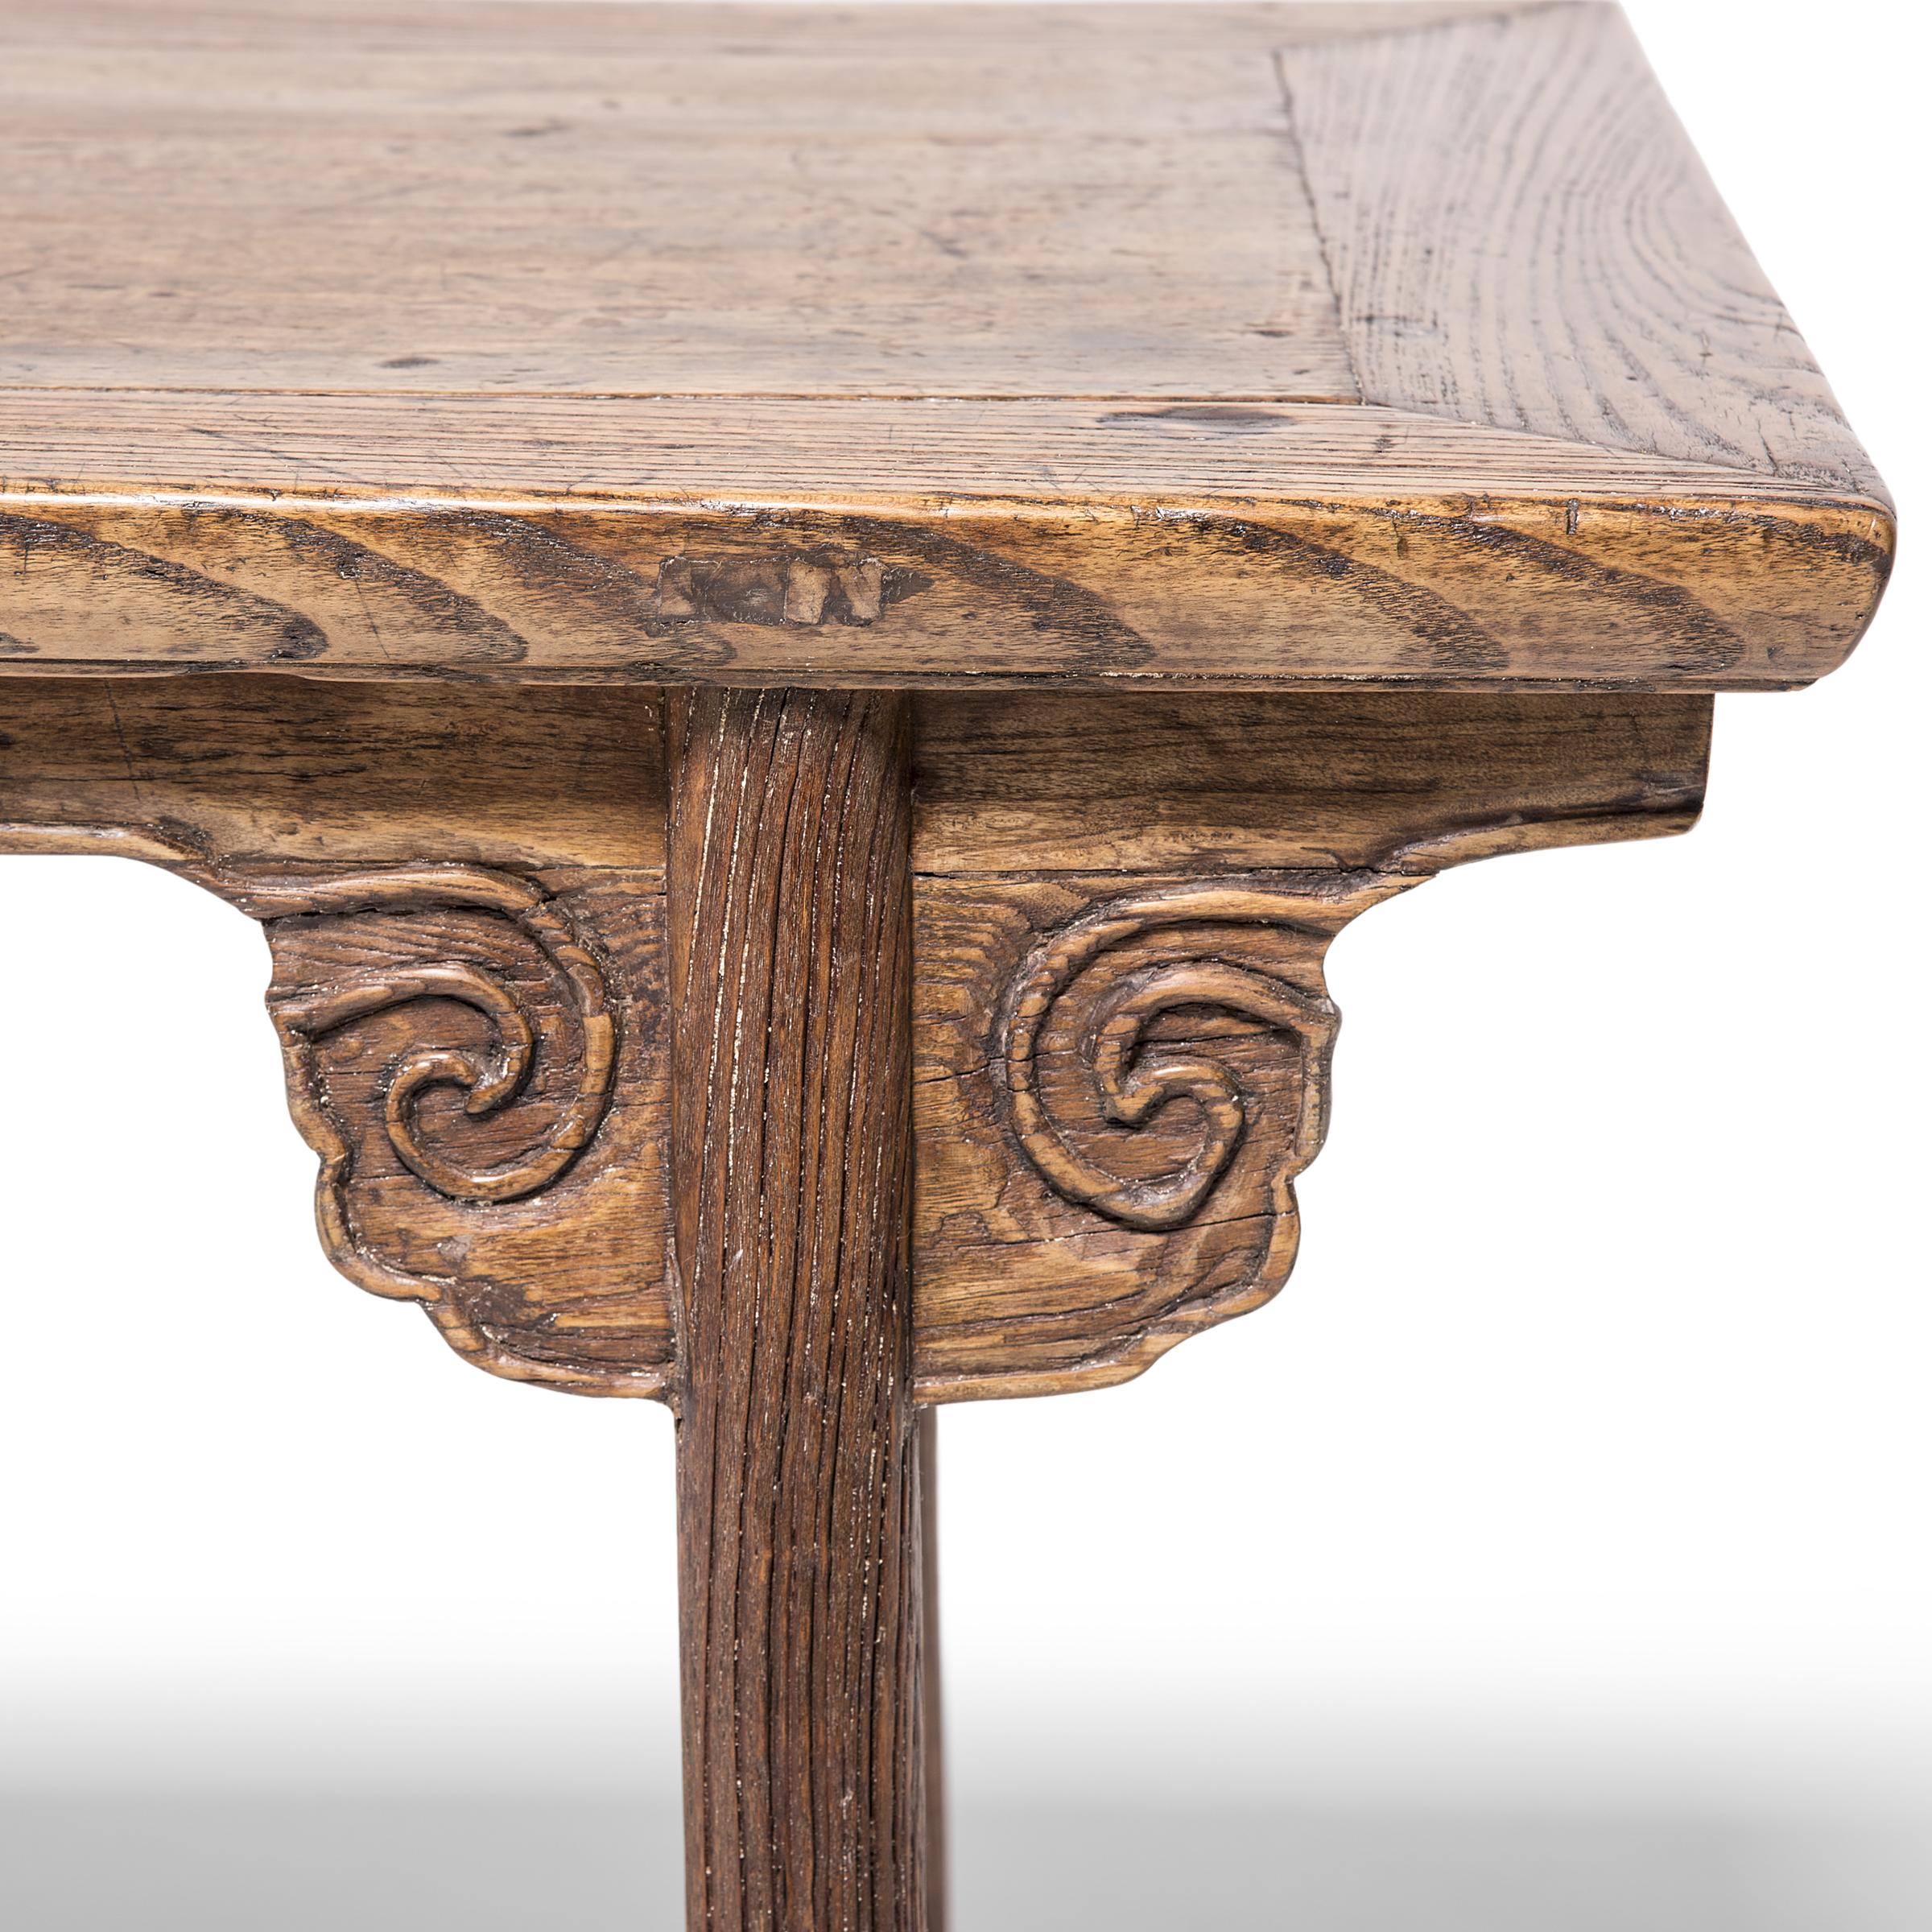 Chinese Writing Table with Cloud Spandrels, c. 1850 For Sale 1